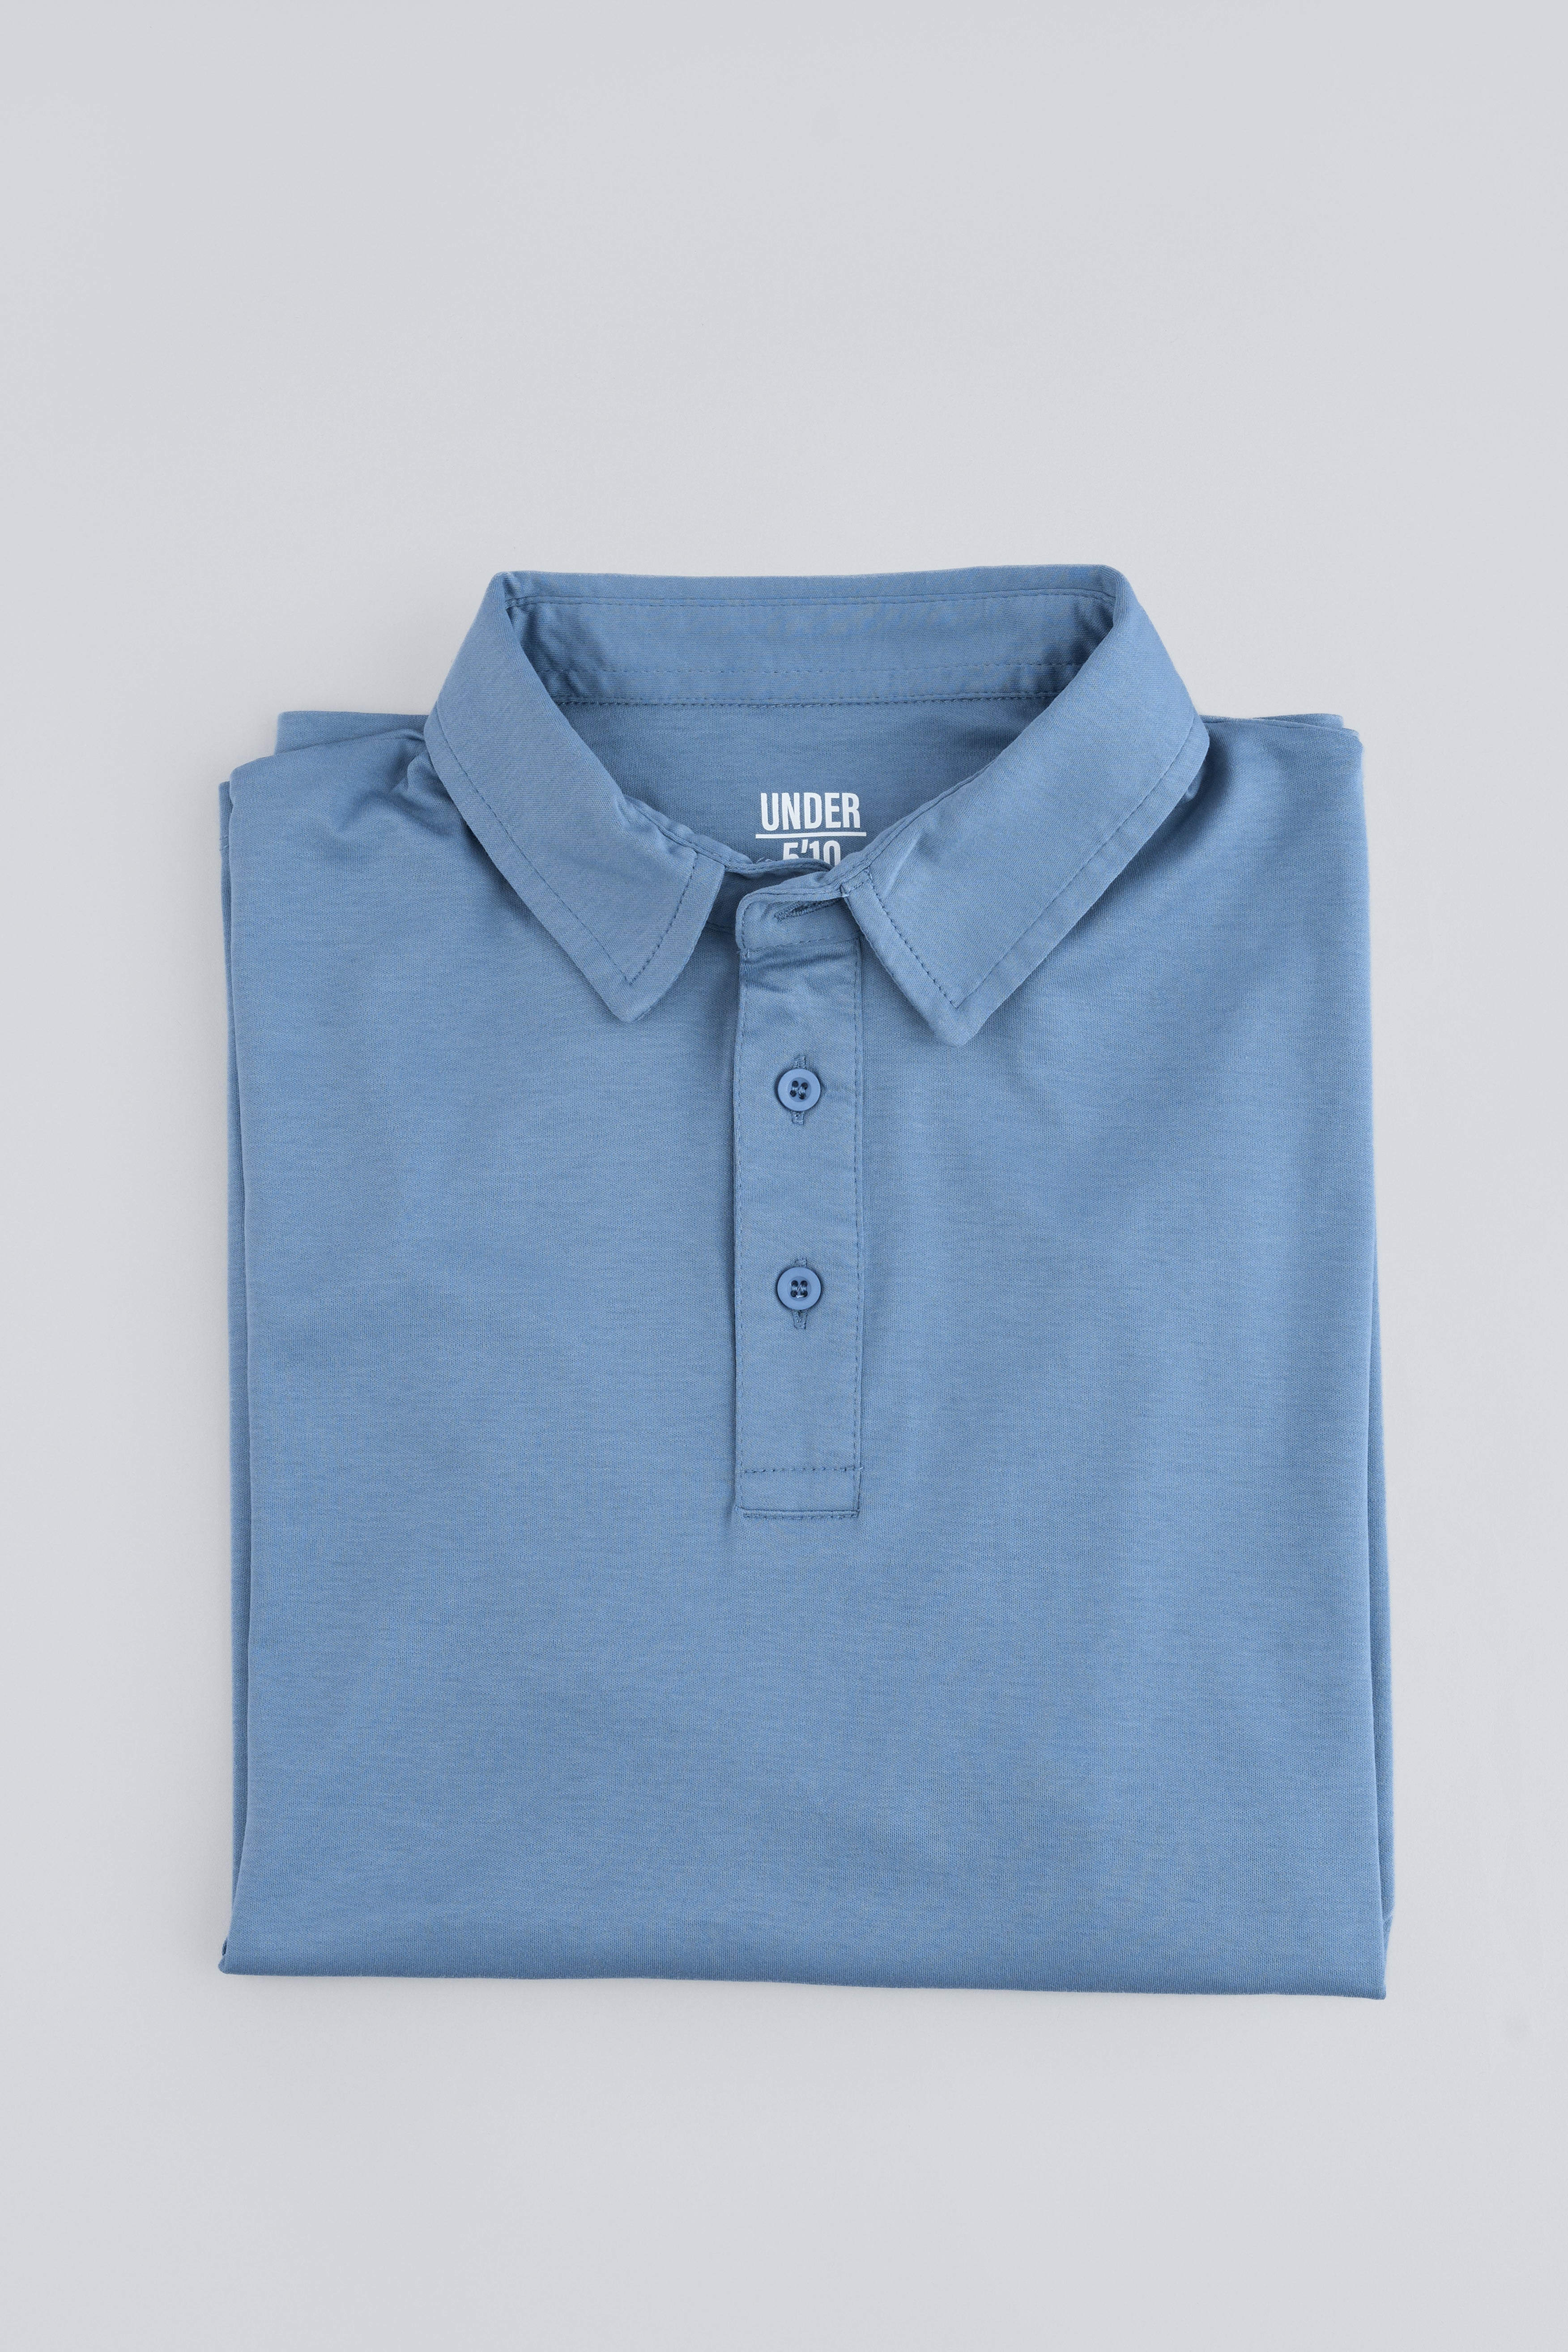 Pima Cool Touch Polo Steel Blue